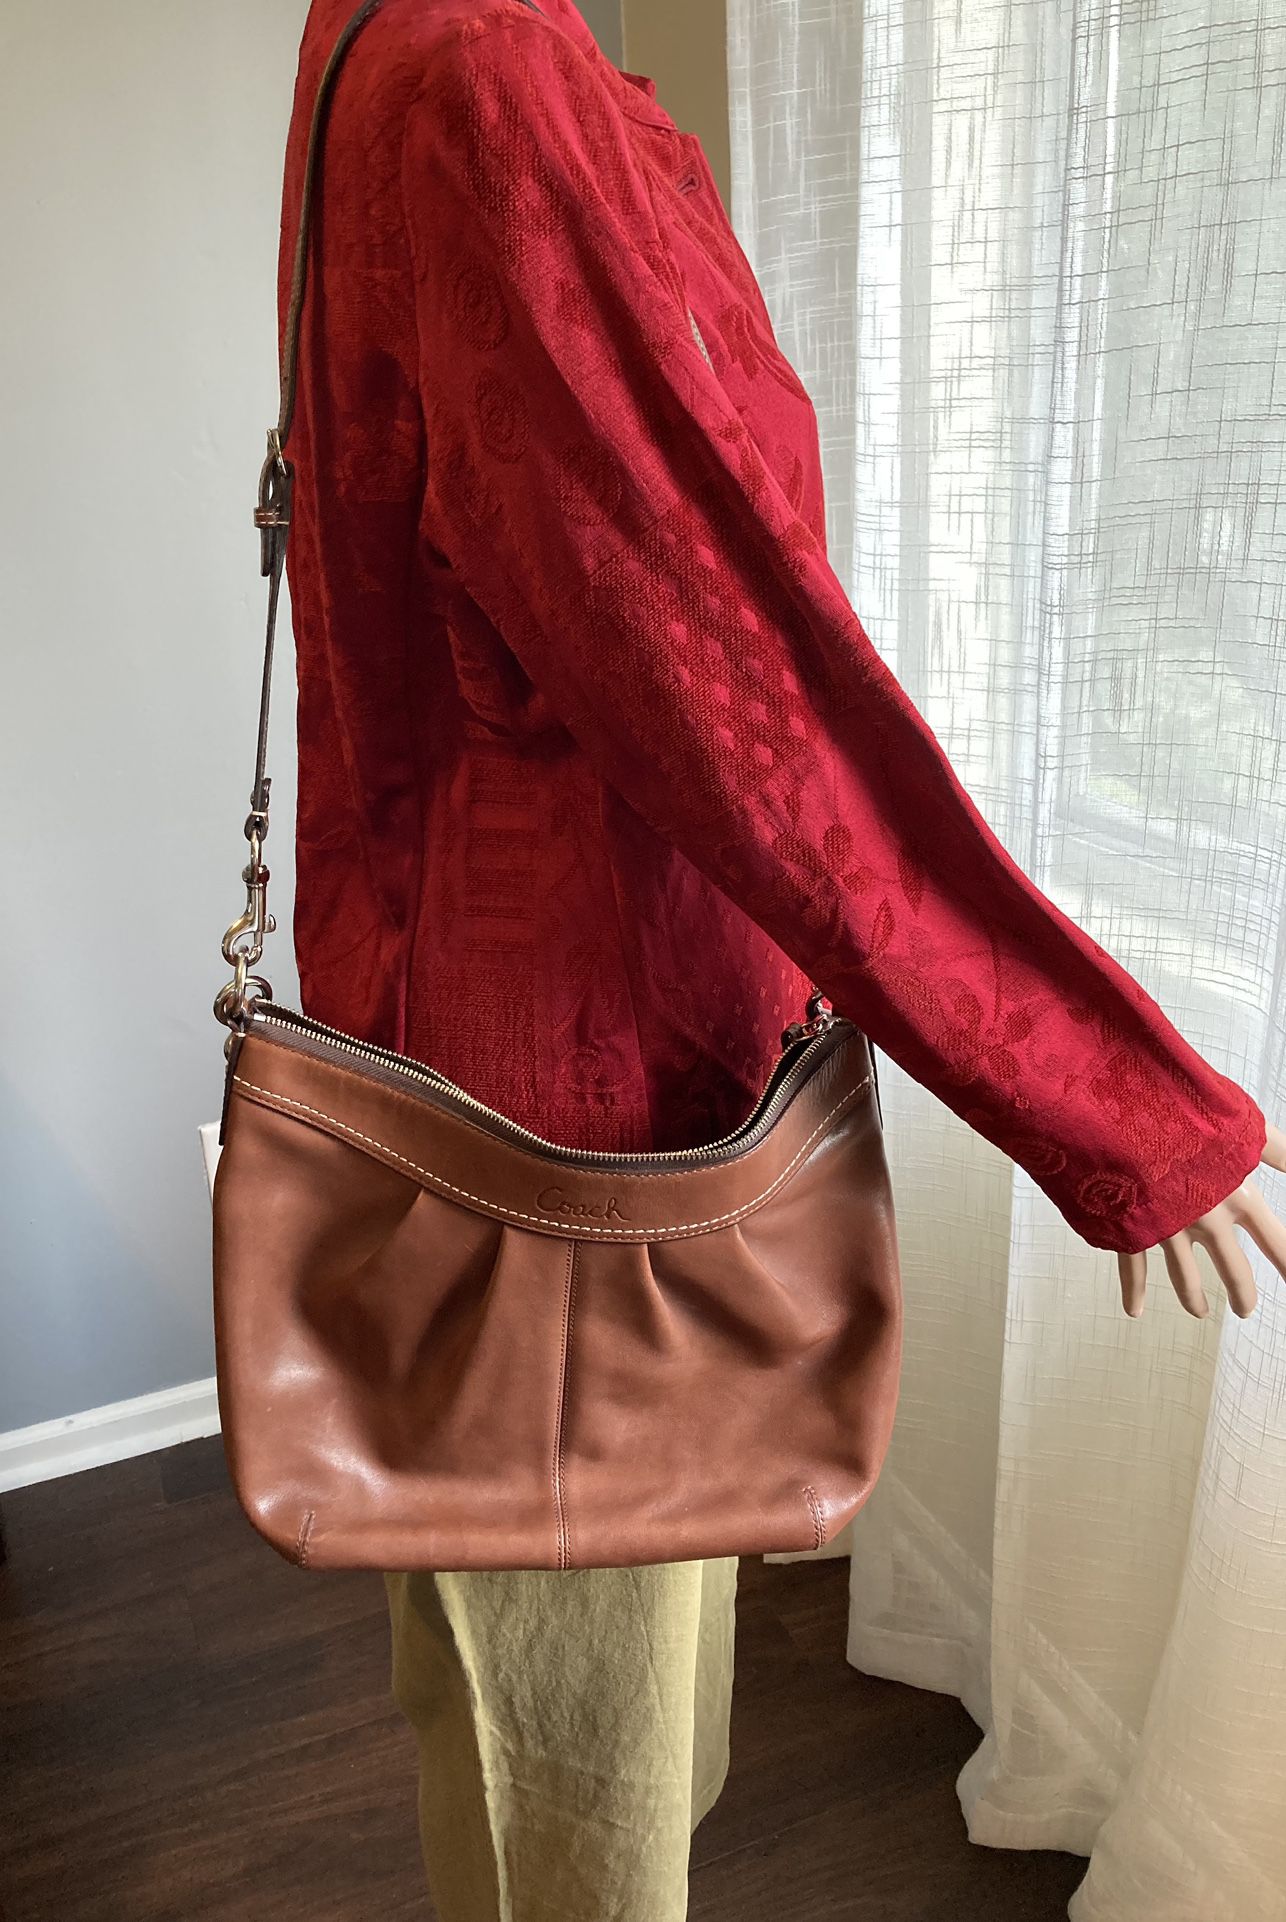 Vintage Coach Soho Hobo Bag, Pleated, Brown Leather, Excellent